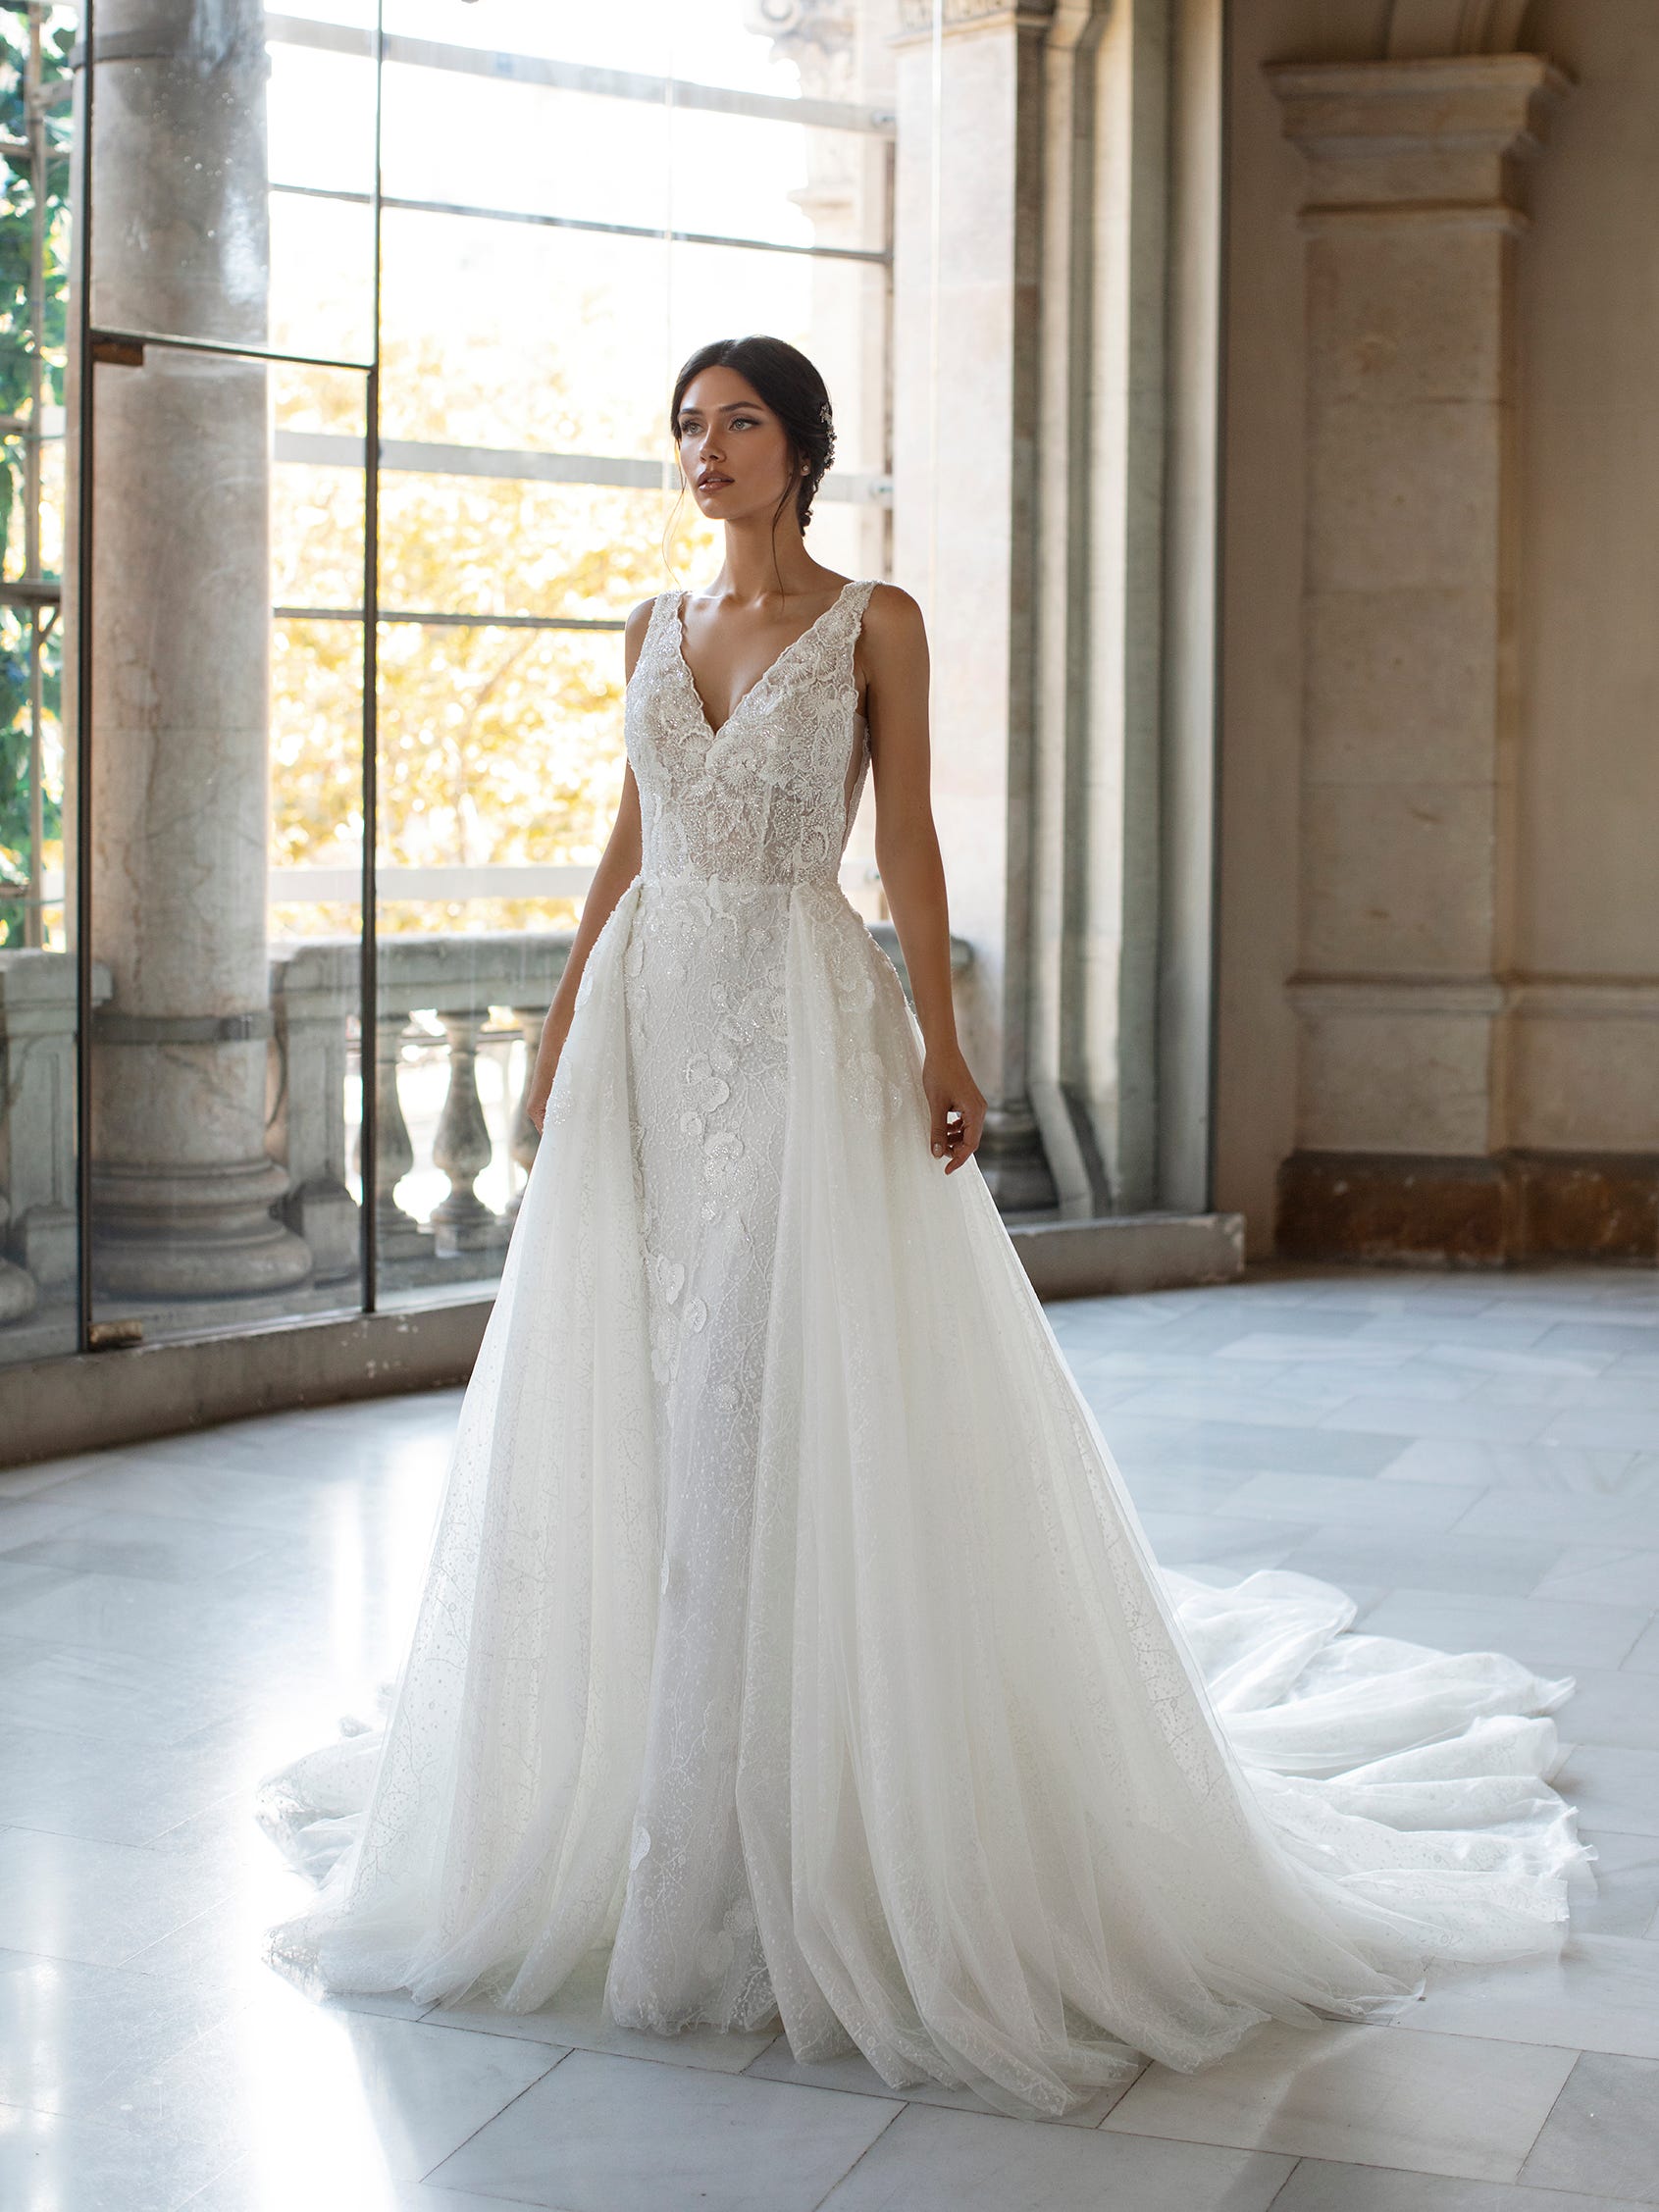 The Convertible wedding dress? Yes, it ...